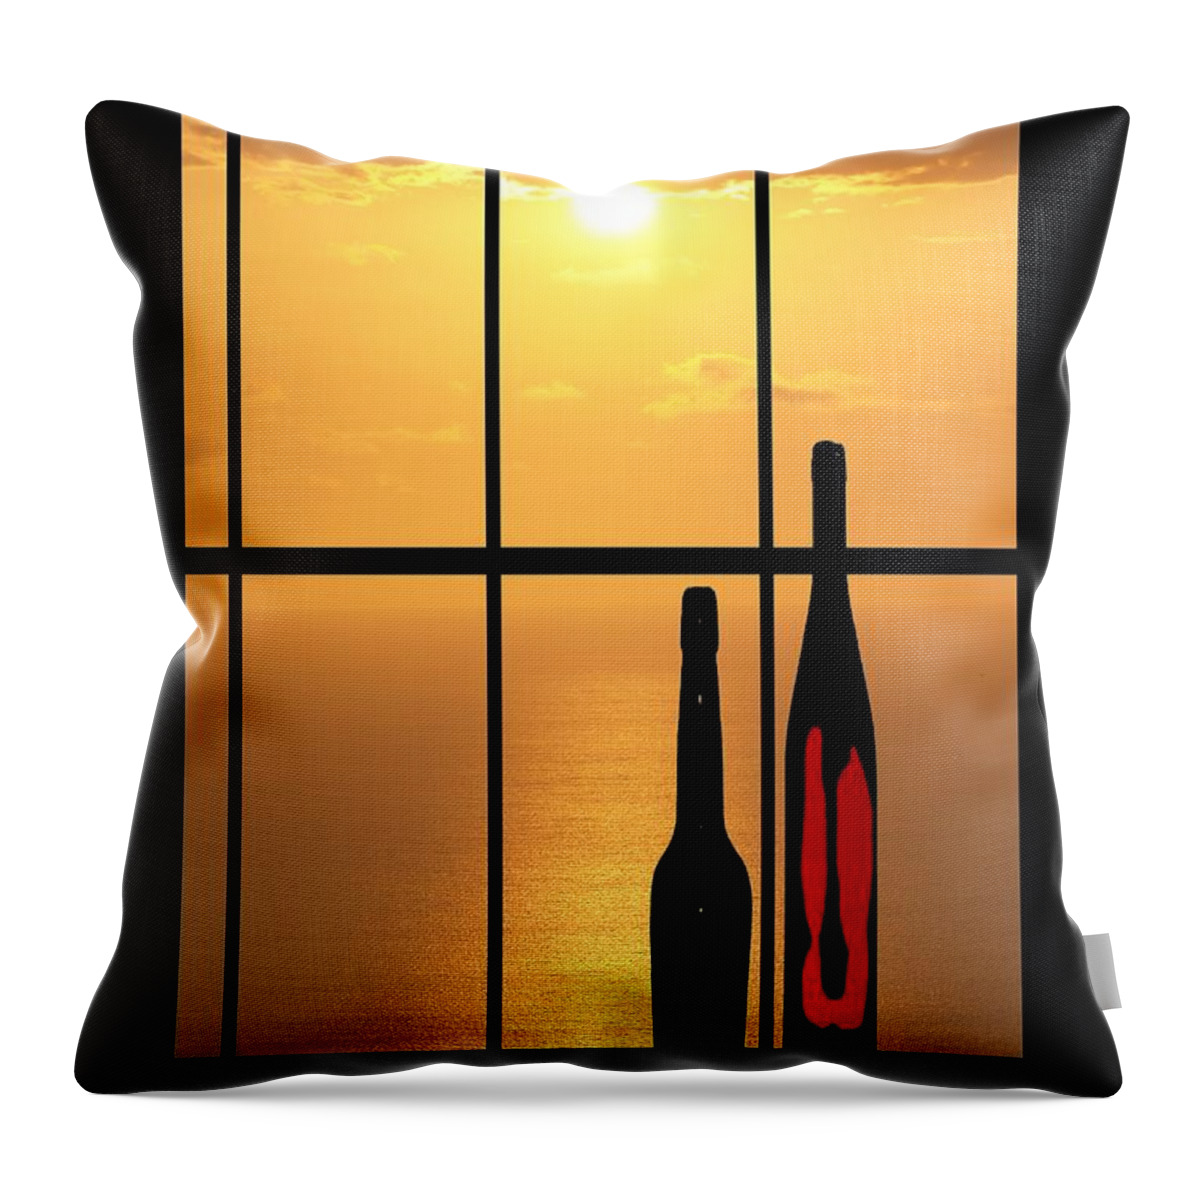 Hawaii Throw Pillow featuring the photograph Sunset In Hawaii #2 by Athala Bruckner